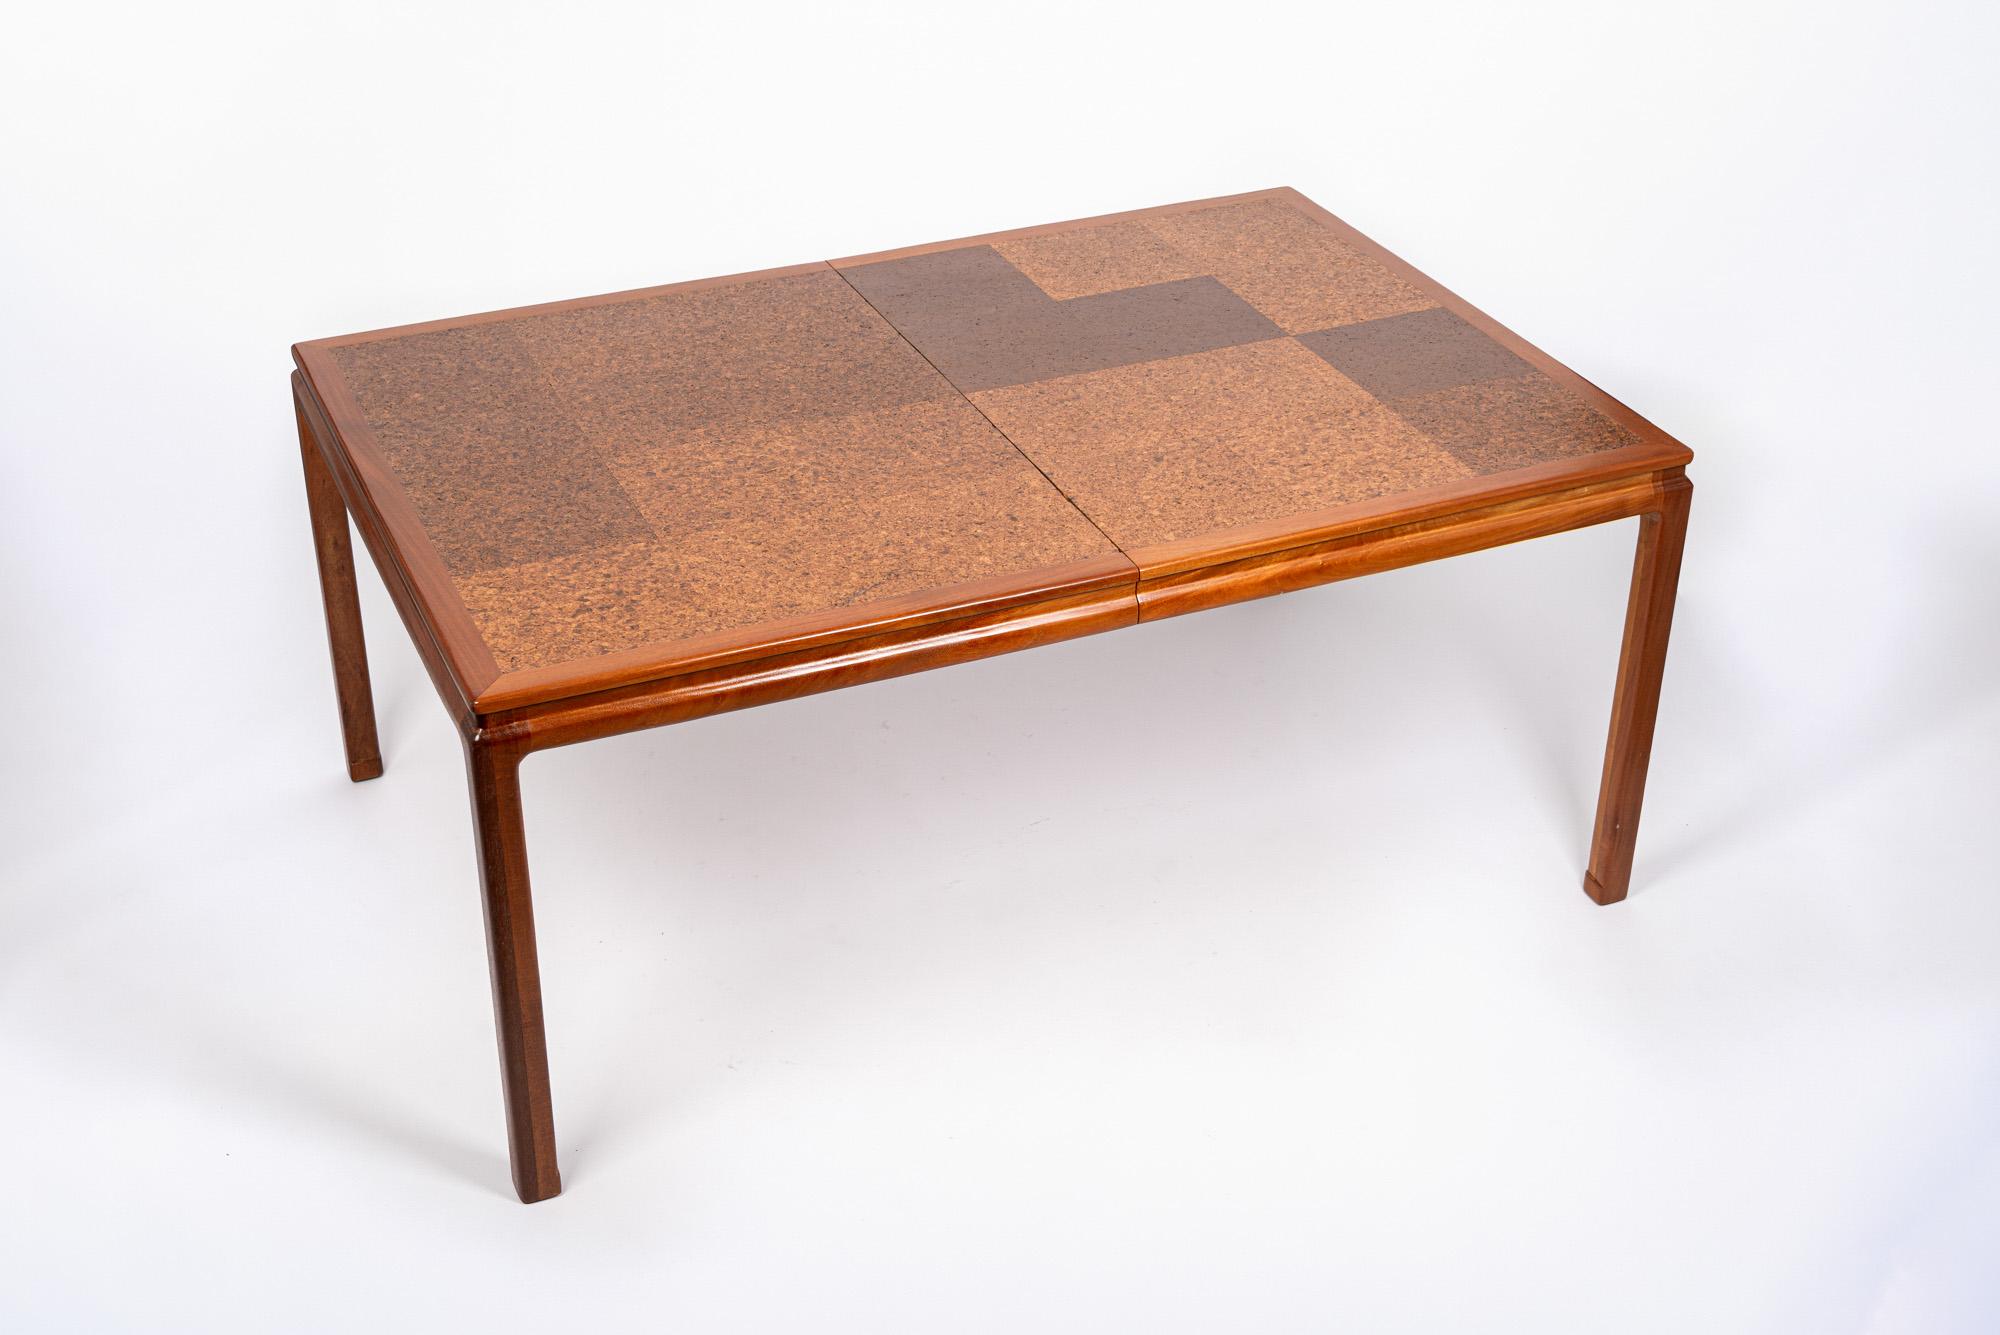 This vintage mid century modern dining table was designed by Edward Wormley for Dunbar circa 1960. This exceptional table has clean, minimalist lines and is expertly crafted from mahogany wood and cork with a patchwork pattern cork tabletop and